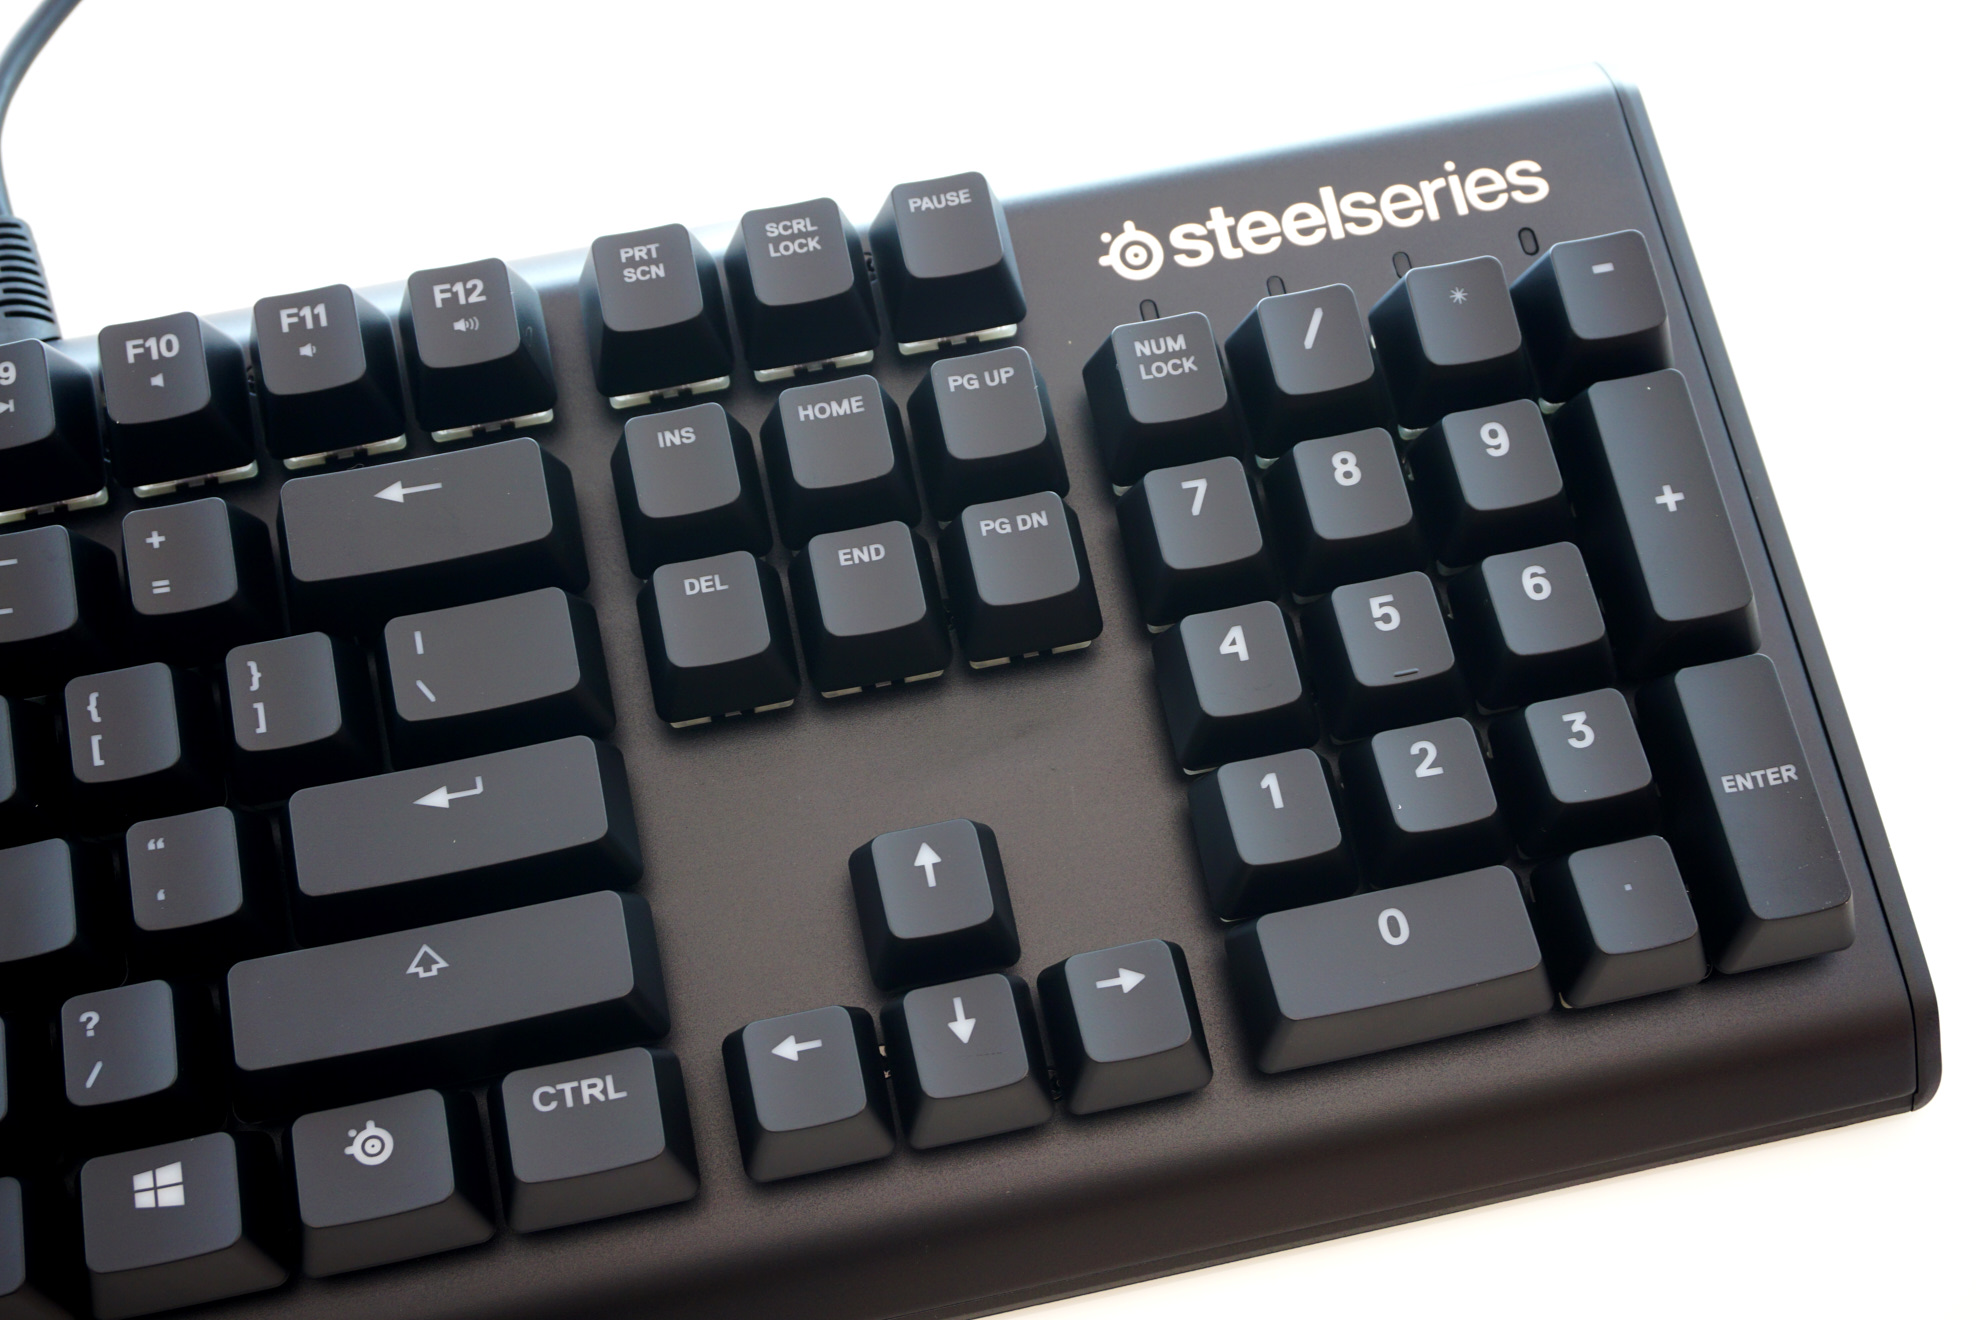 The Steelseries Apex M750 Mechanical Keyboard The Steelseries Apex M750 Mechanical Gaming Keyboard Review Set Apart By Software